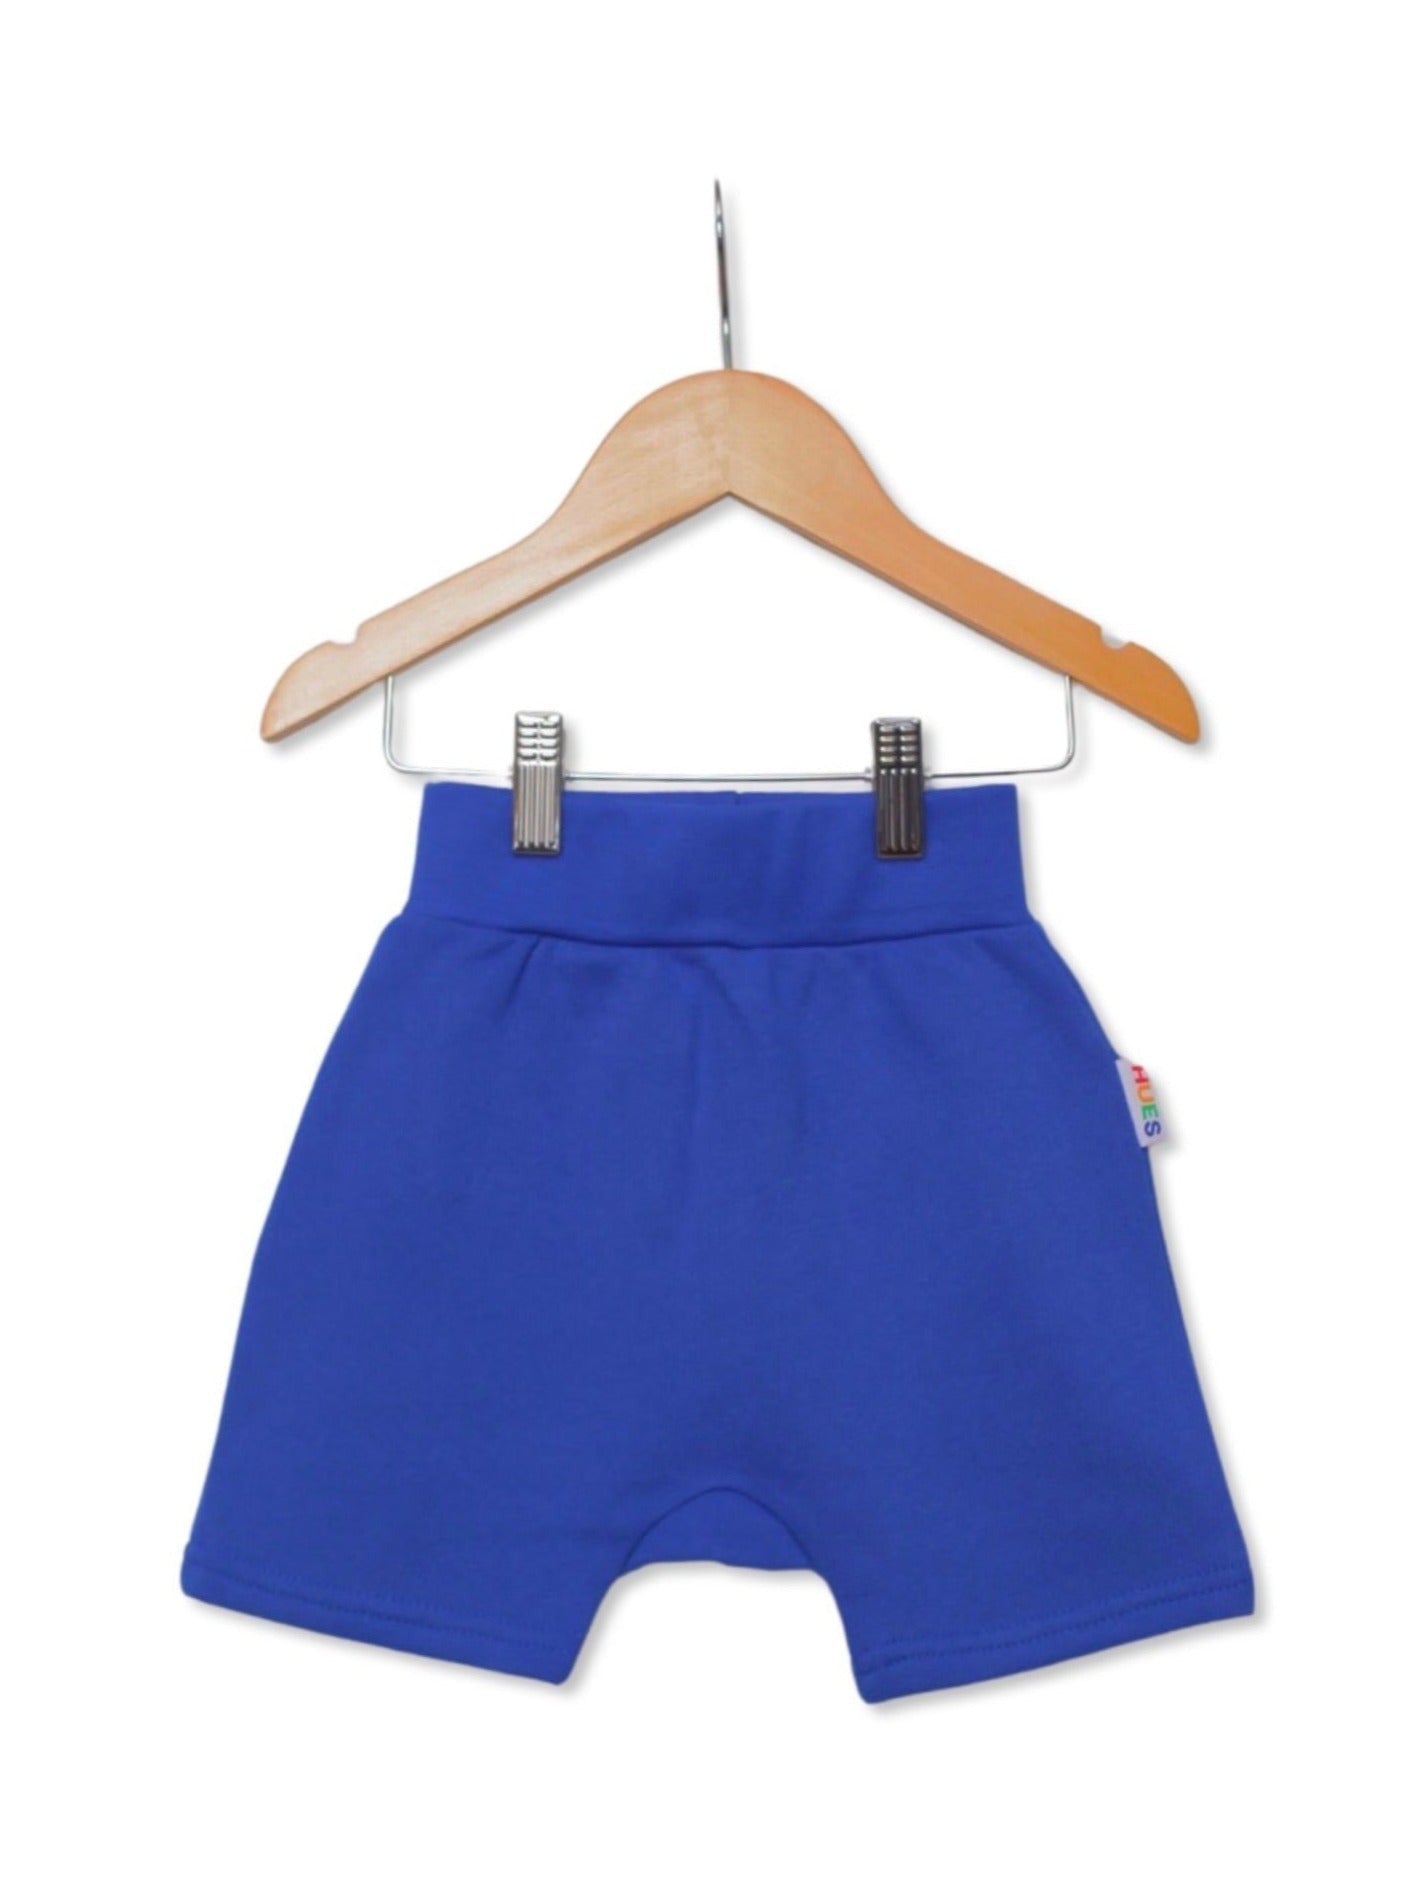 Kids Unisex Blue Shorts Front View - Hues Clothing